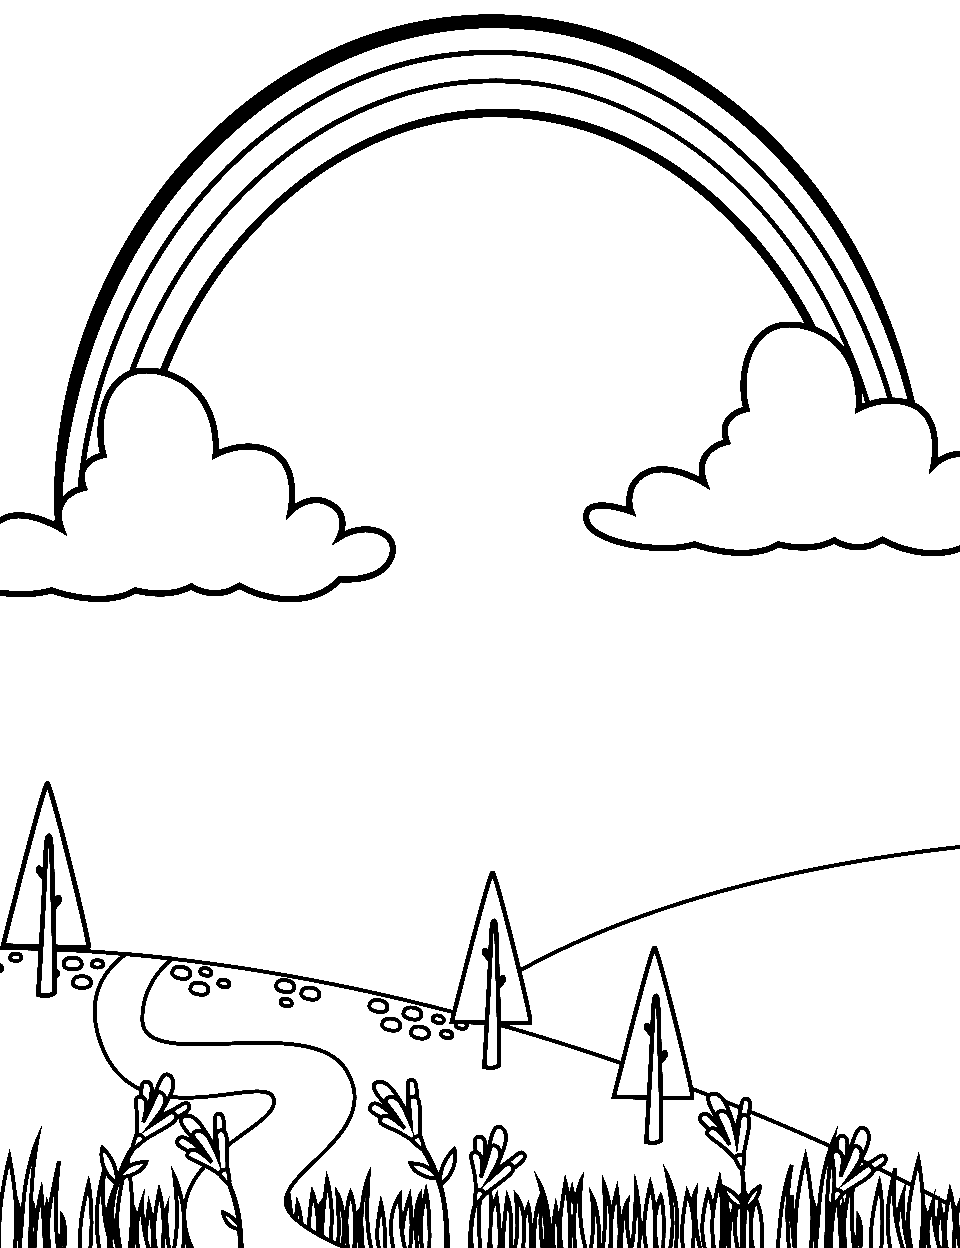 Coloring Page painter's easel - free printable coloring pages